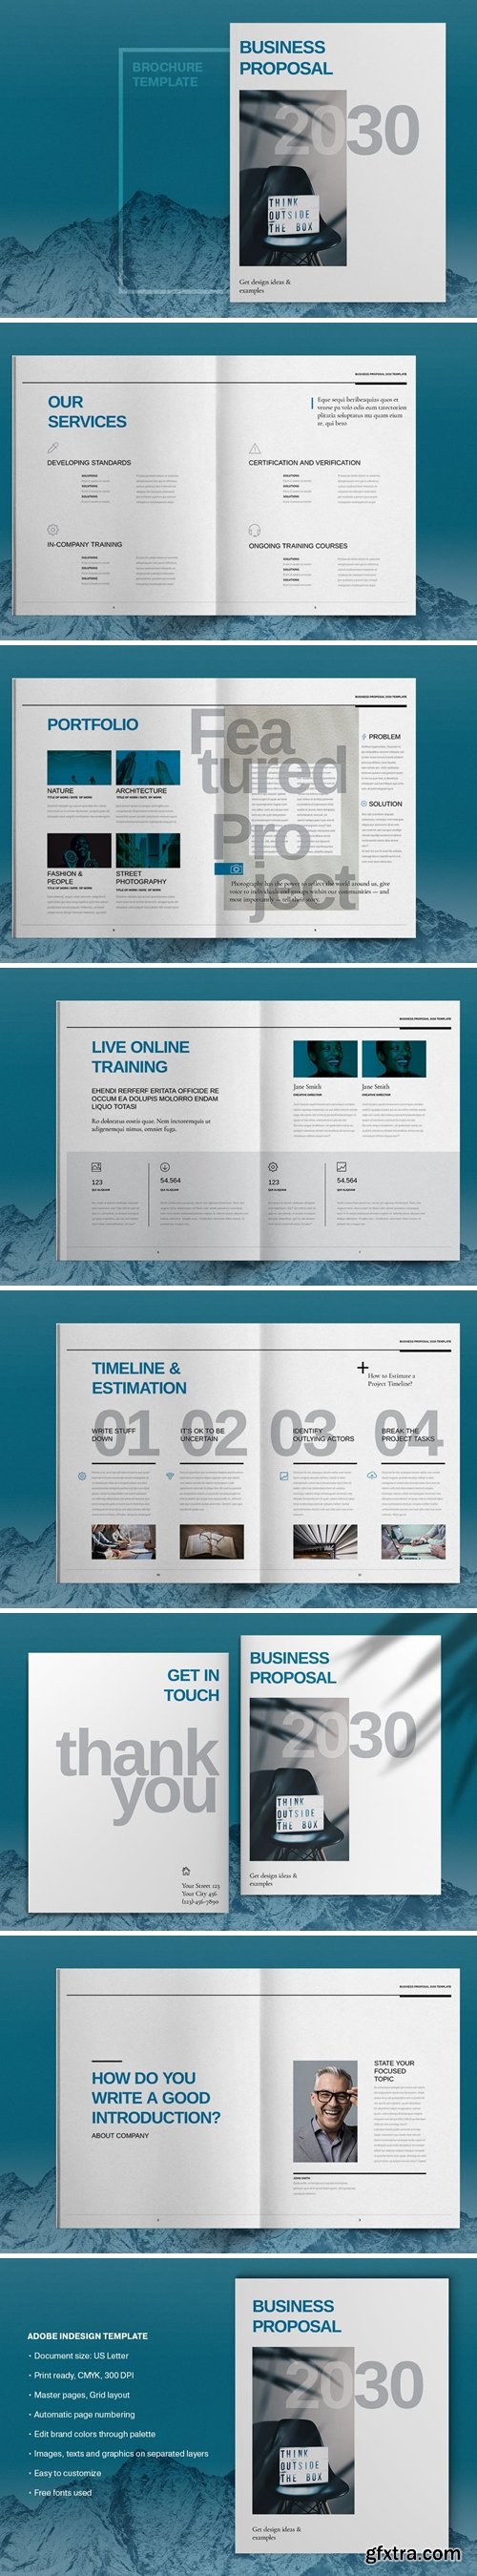 Blue Business Proposal Template